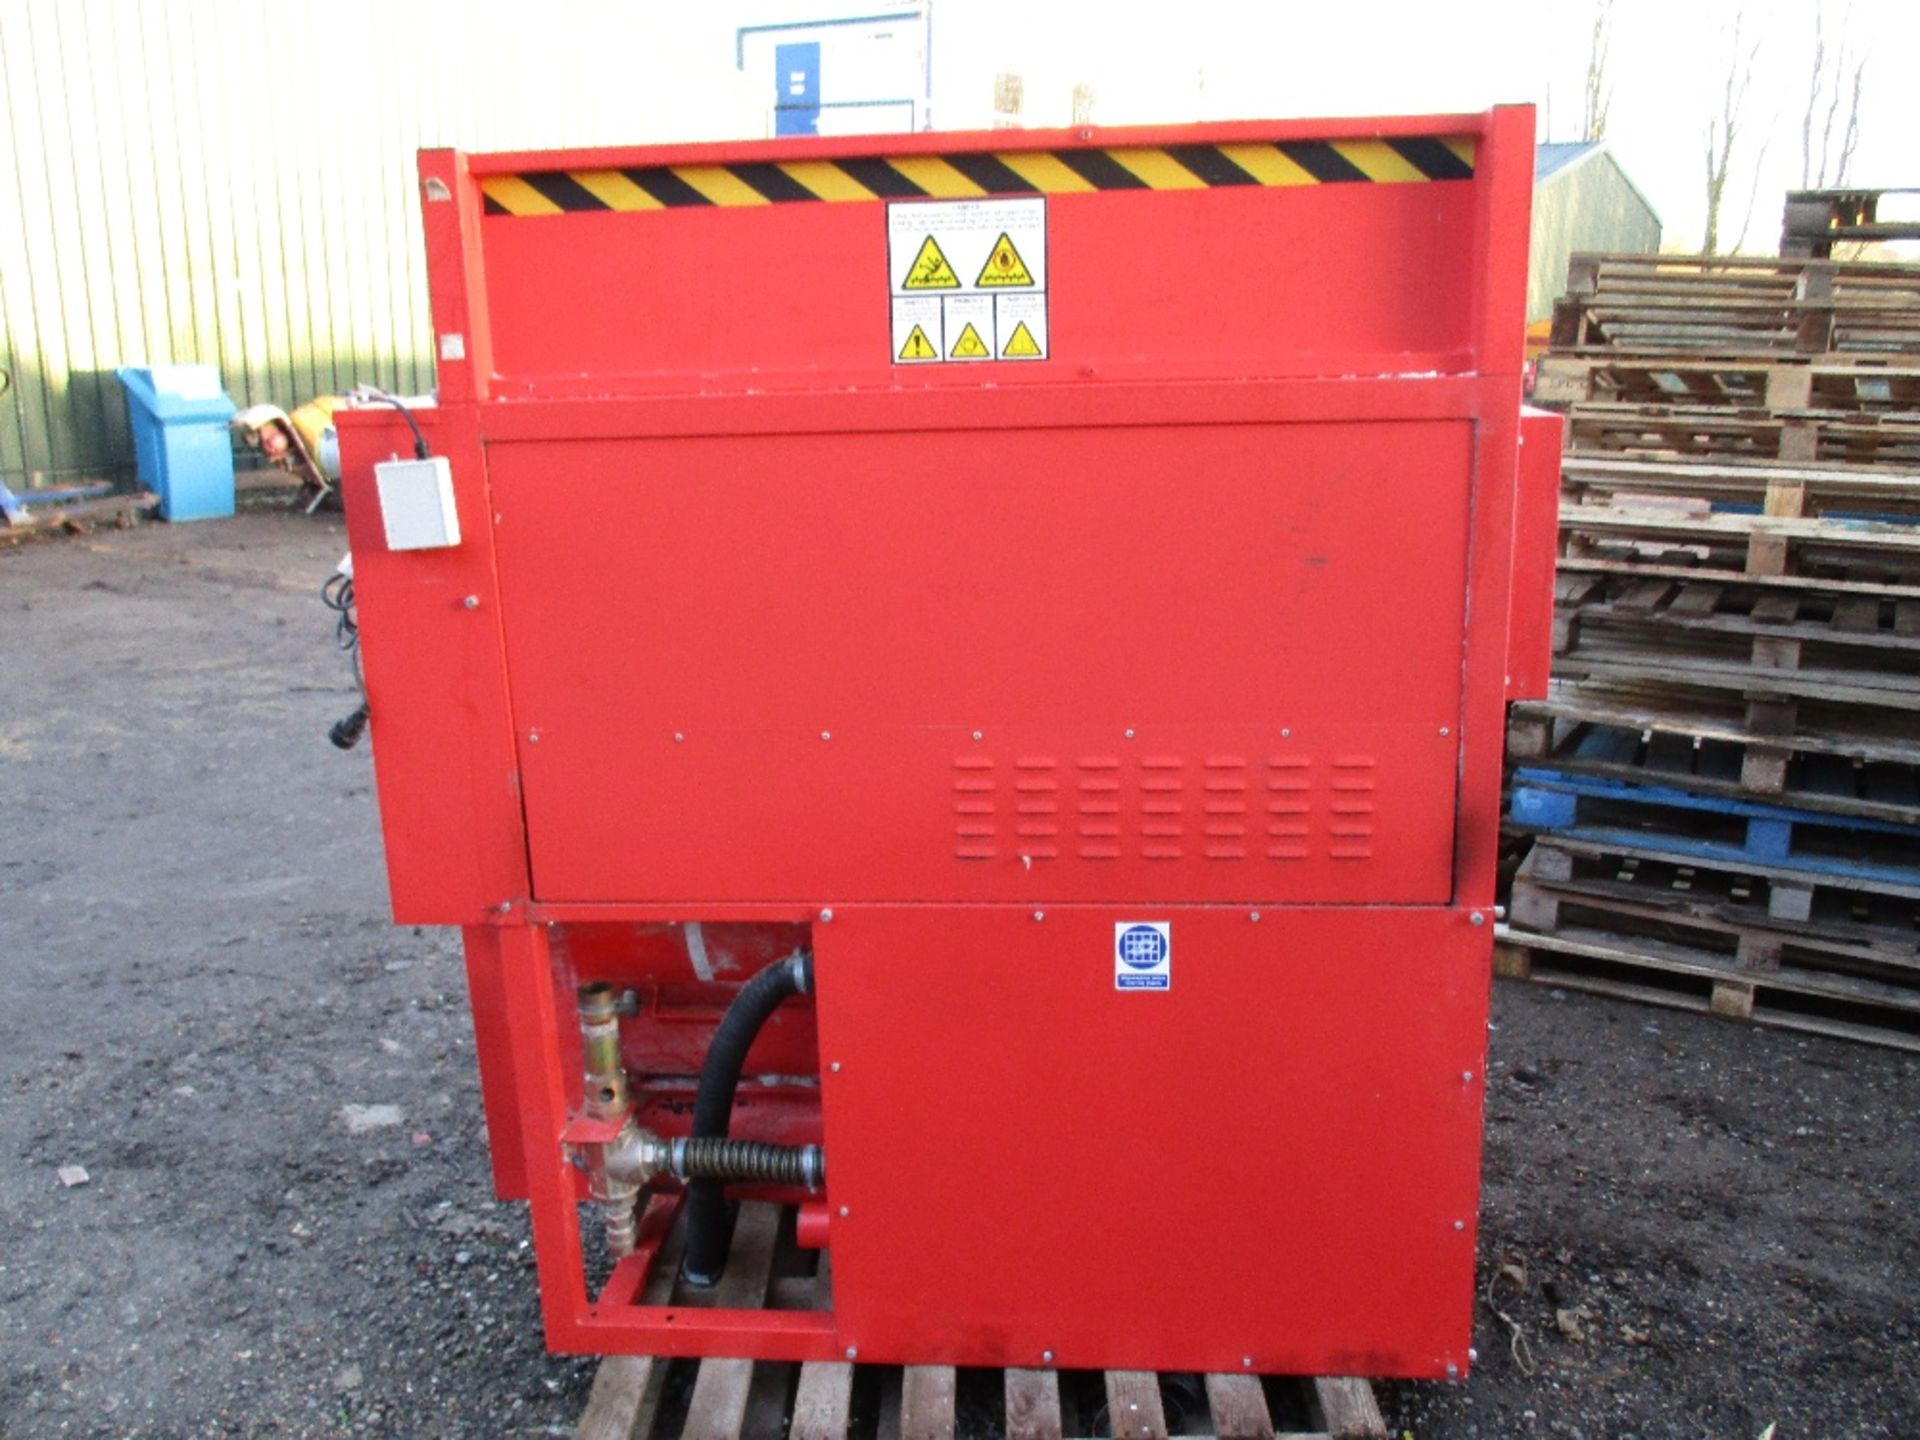 Stewart Energy Lister engined blown insulation machine sourced from company liquidation. - Image 4 of 6